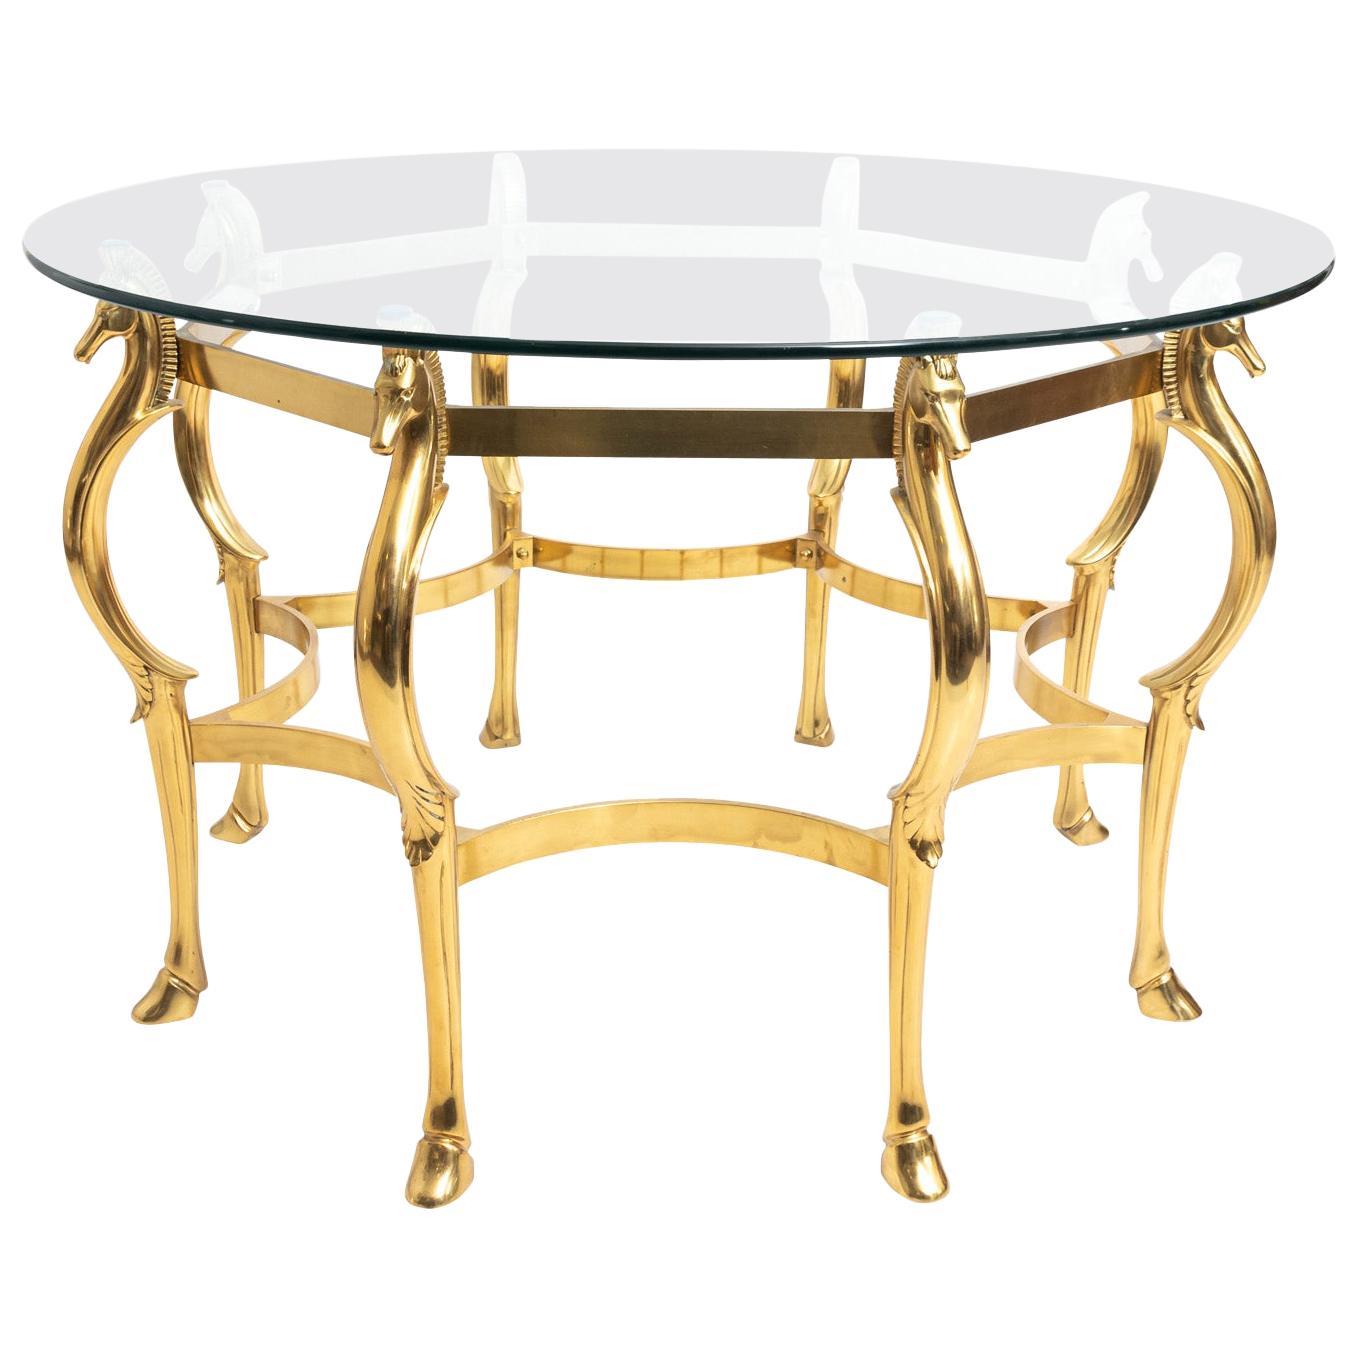 Midcentury Brass Cheval Horse Dining Table Attributed to Maison Jansen